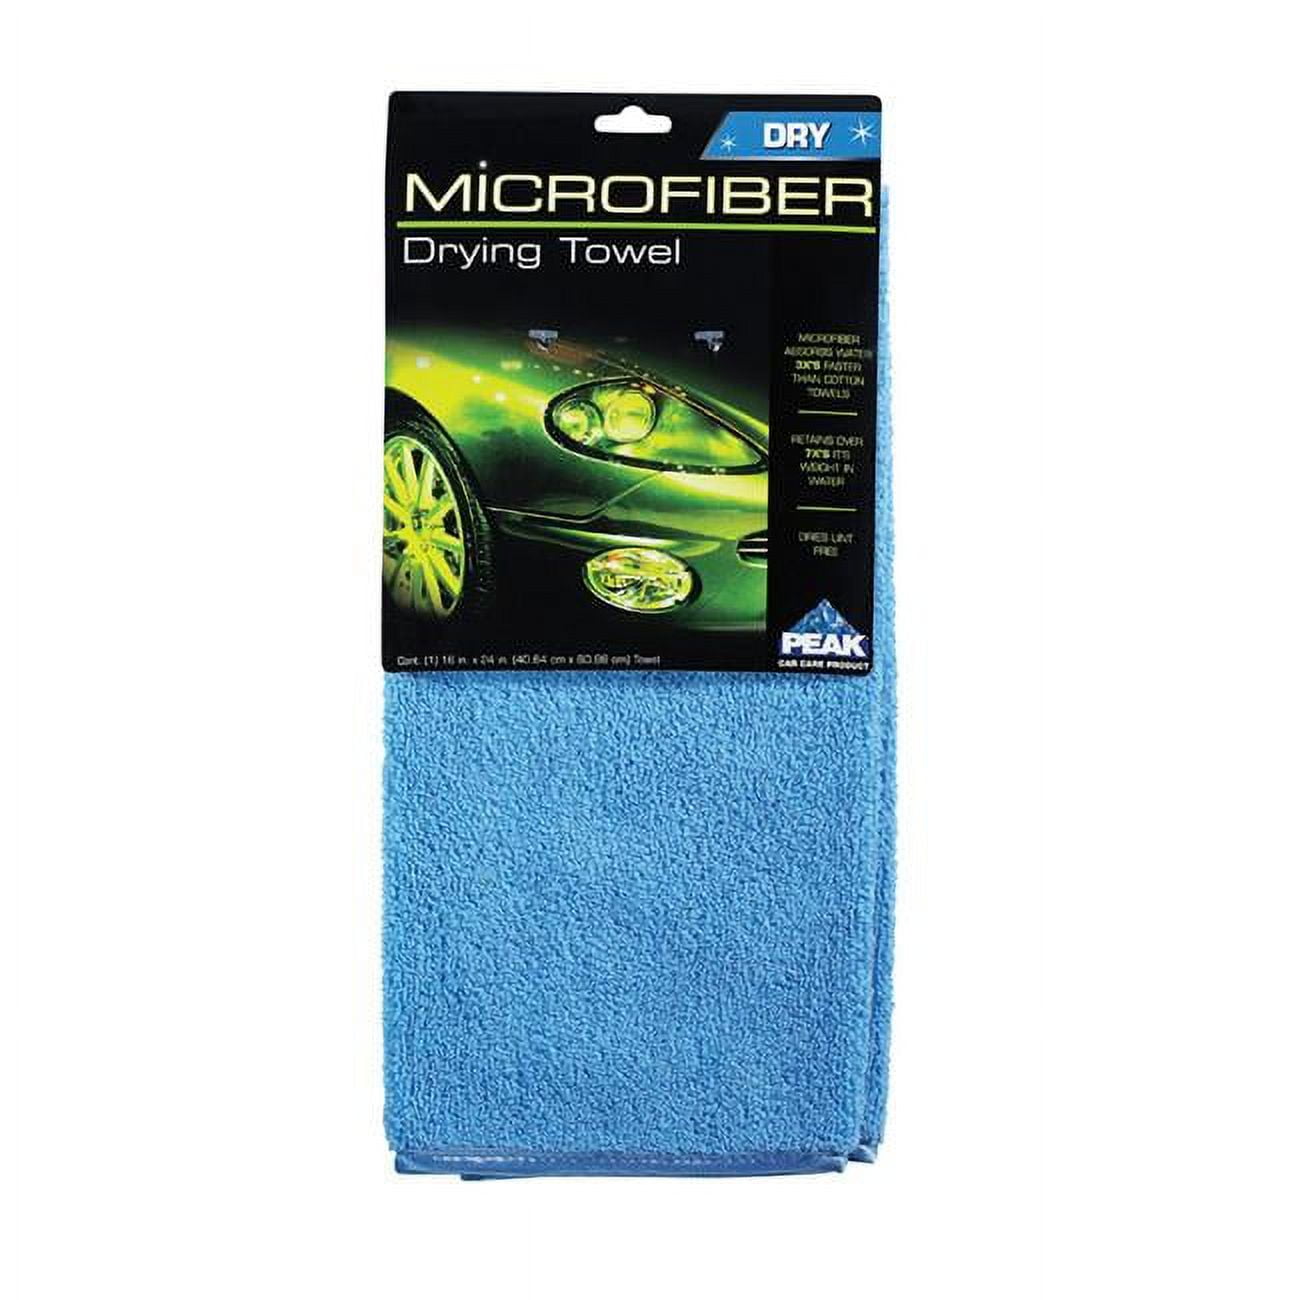 8208159 24 X 16 In. Cotton & Polyester Drying Towel